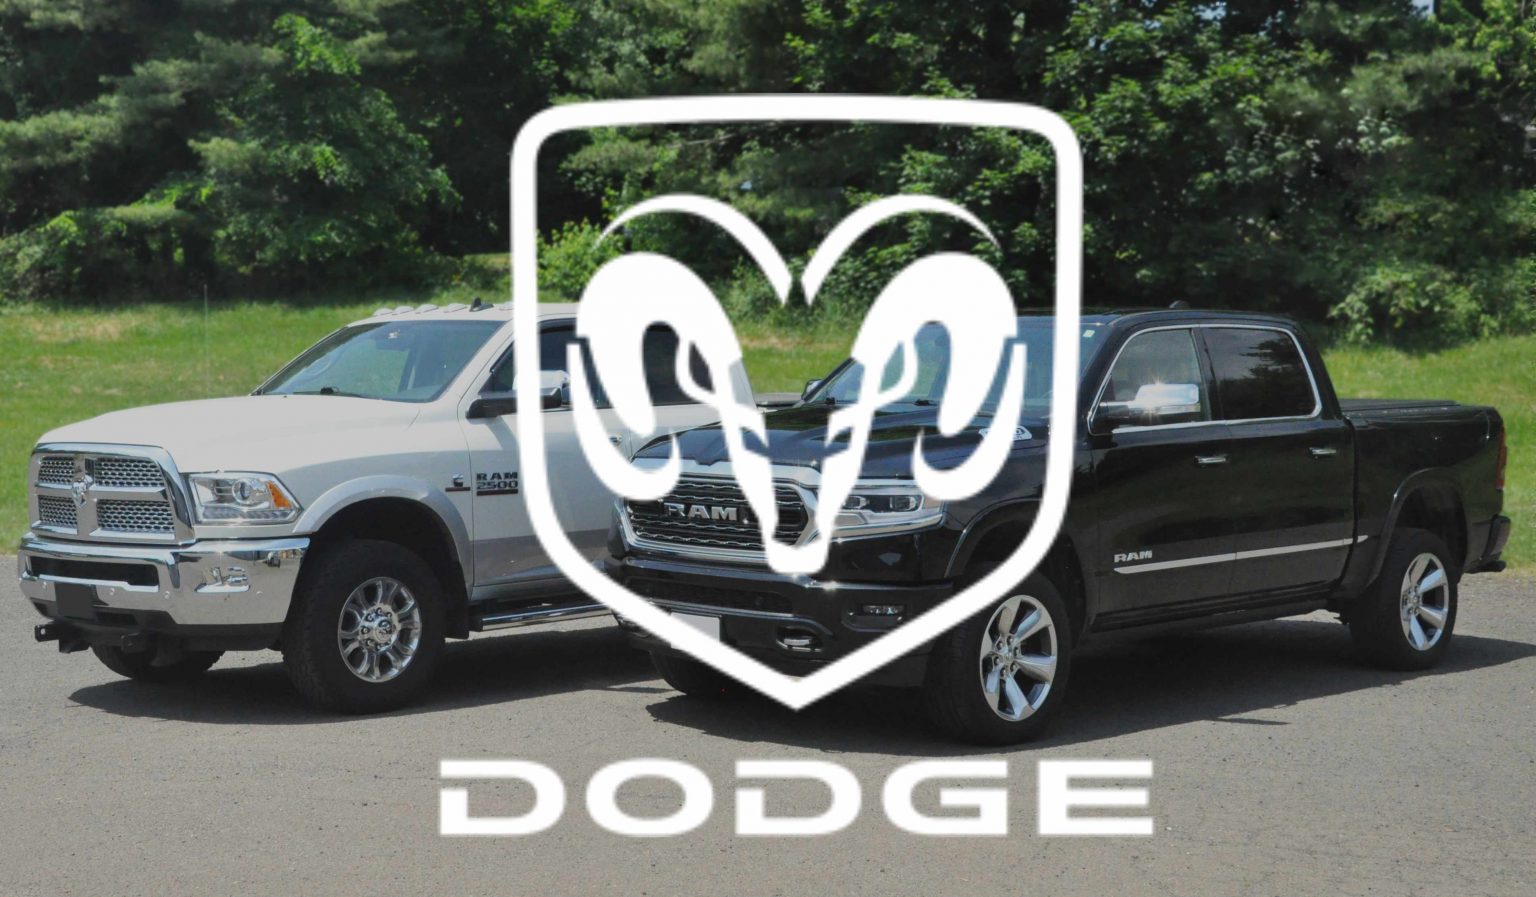 Dodge Category Image - Two Trucks with Dodge Logo